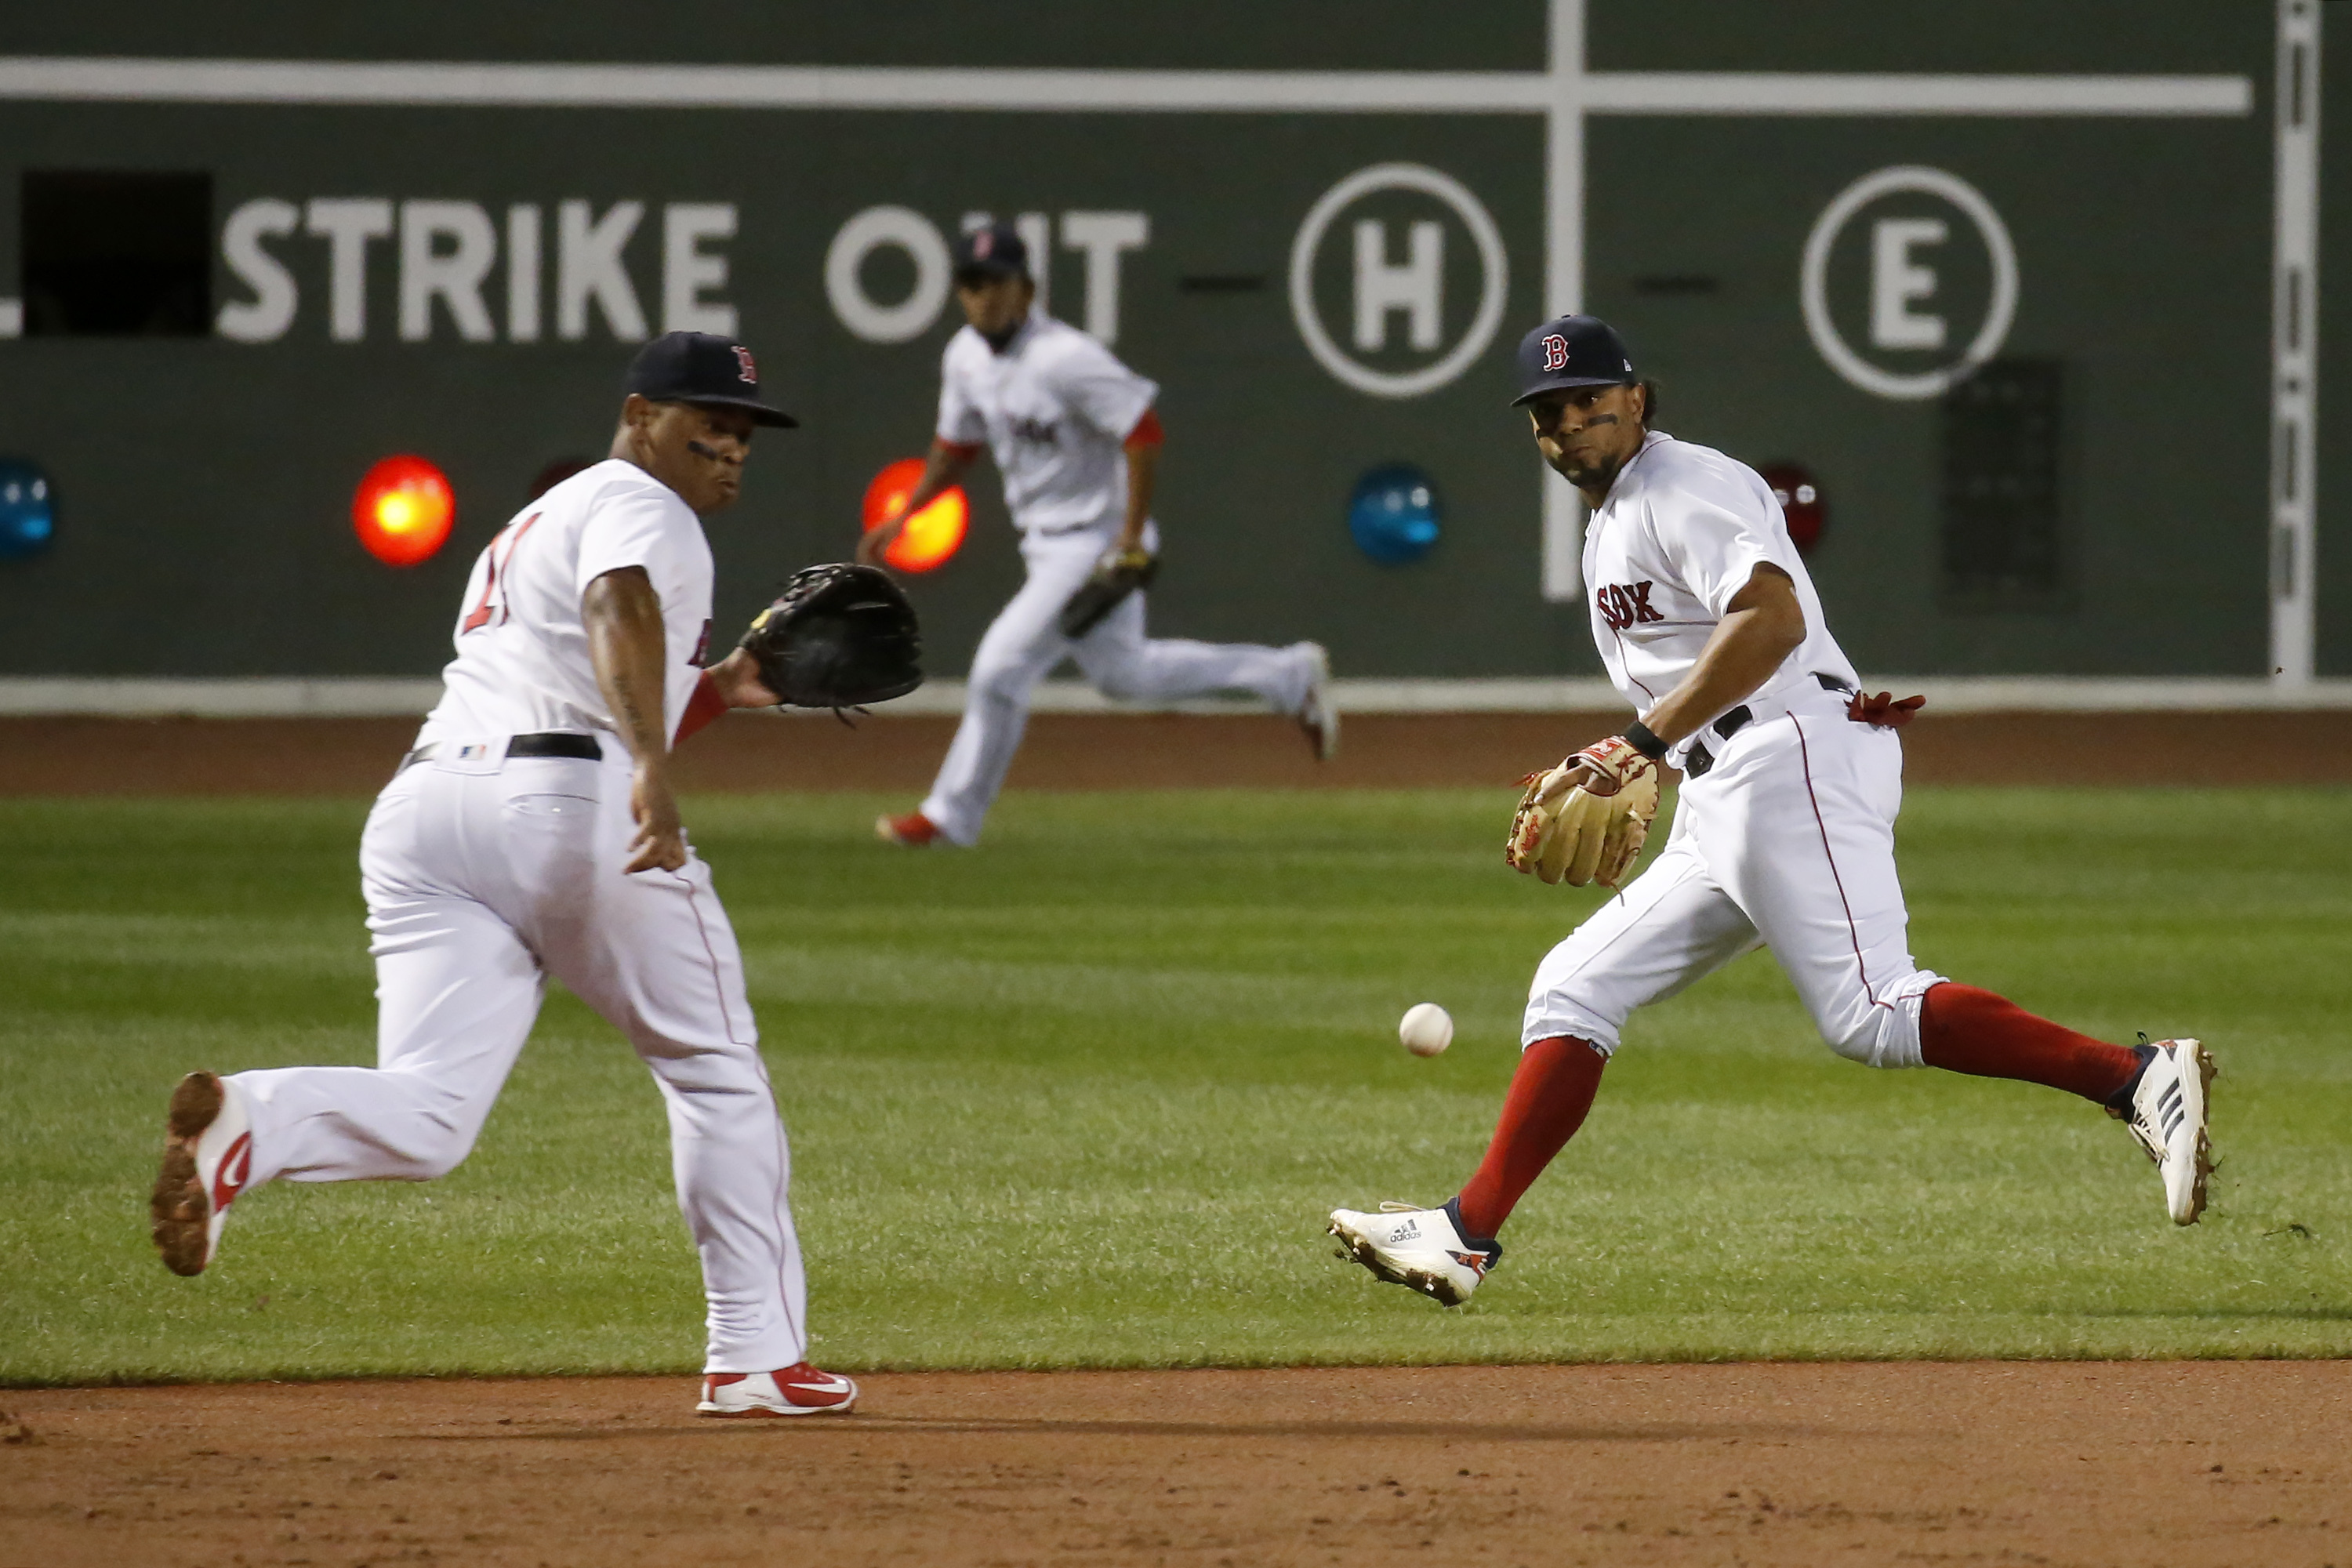 Rafael Devers and Xander Bogaerts have played good defense when the Red Sox infield is shifted.